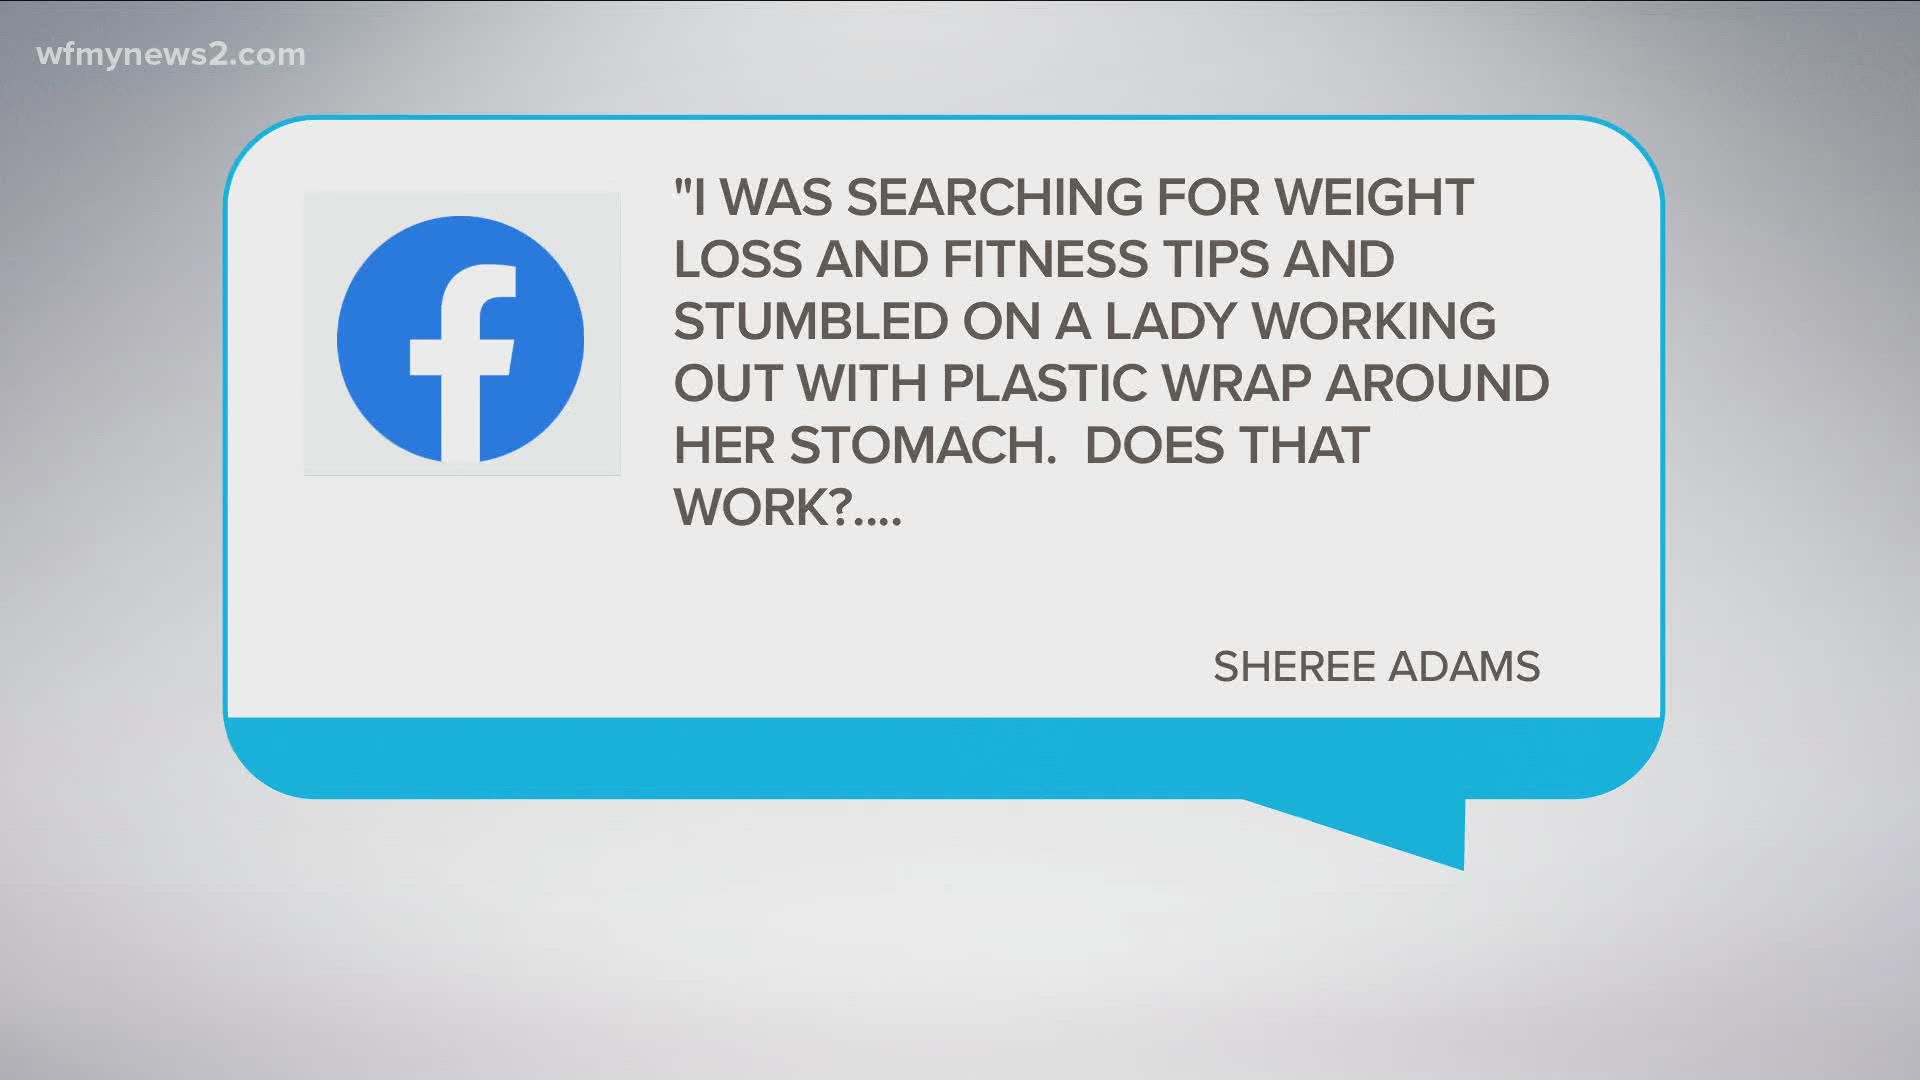 Monday Motivation: The truth about plastic wraps and weight loss